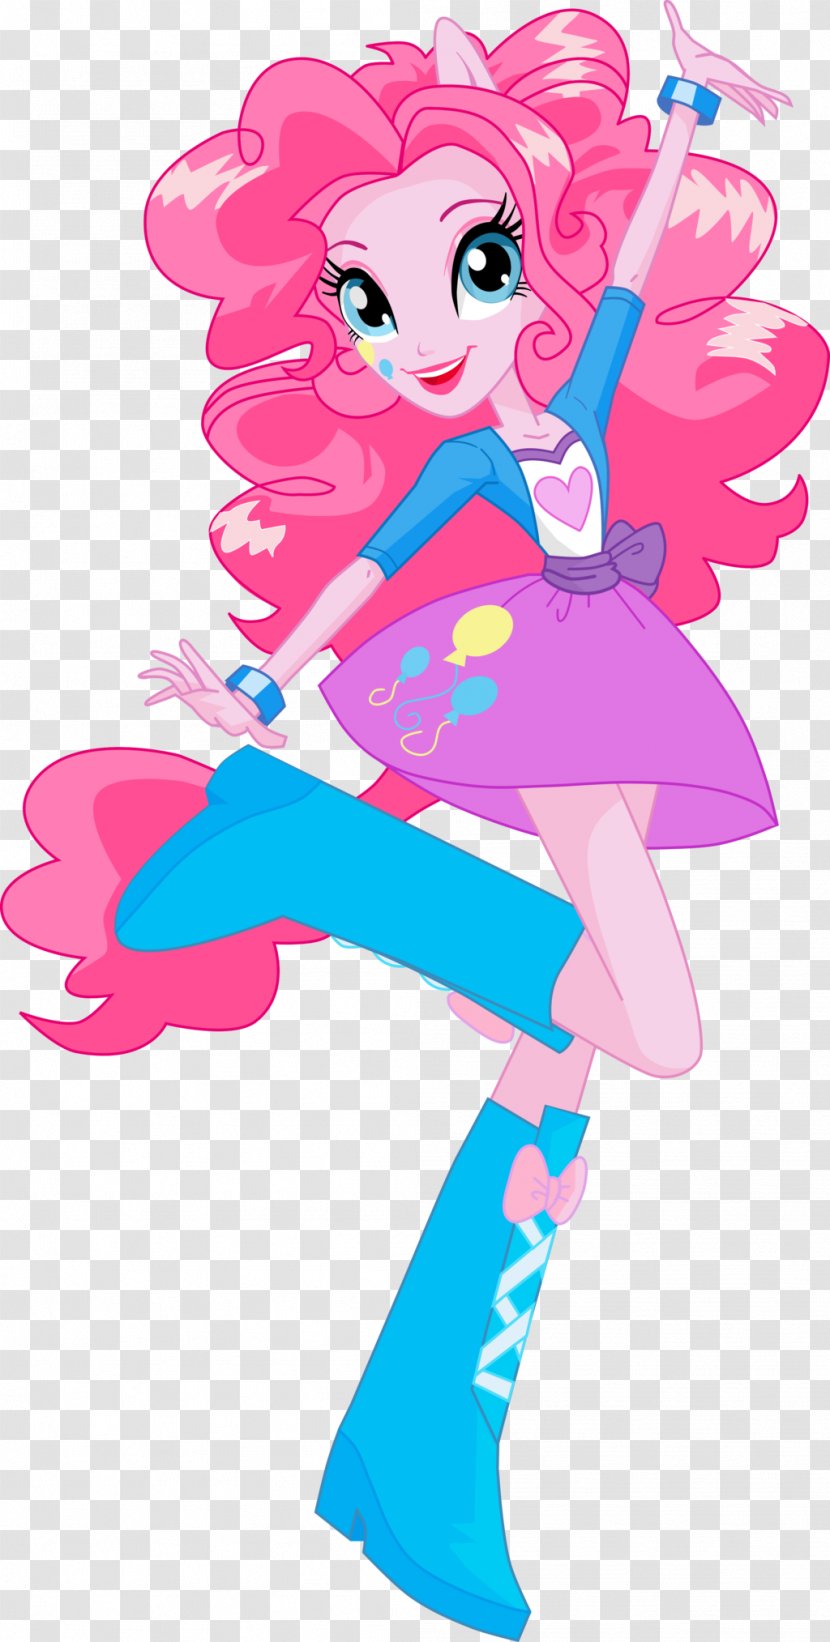 Pinkie Pie My Little Pony: Equestria Girls Twilight Sparkle - Cartoon - Squeezed Vector Transparent PNG